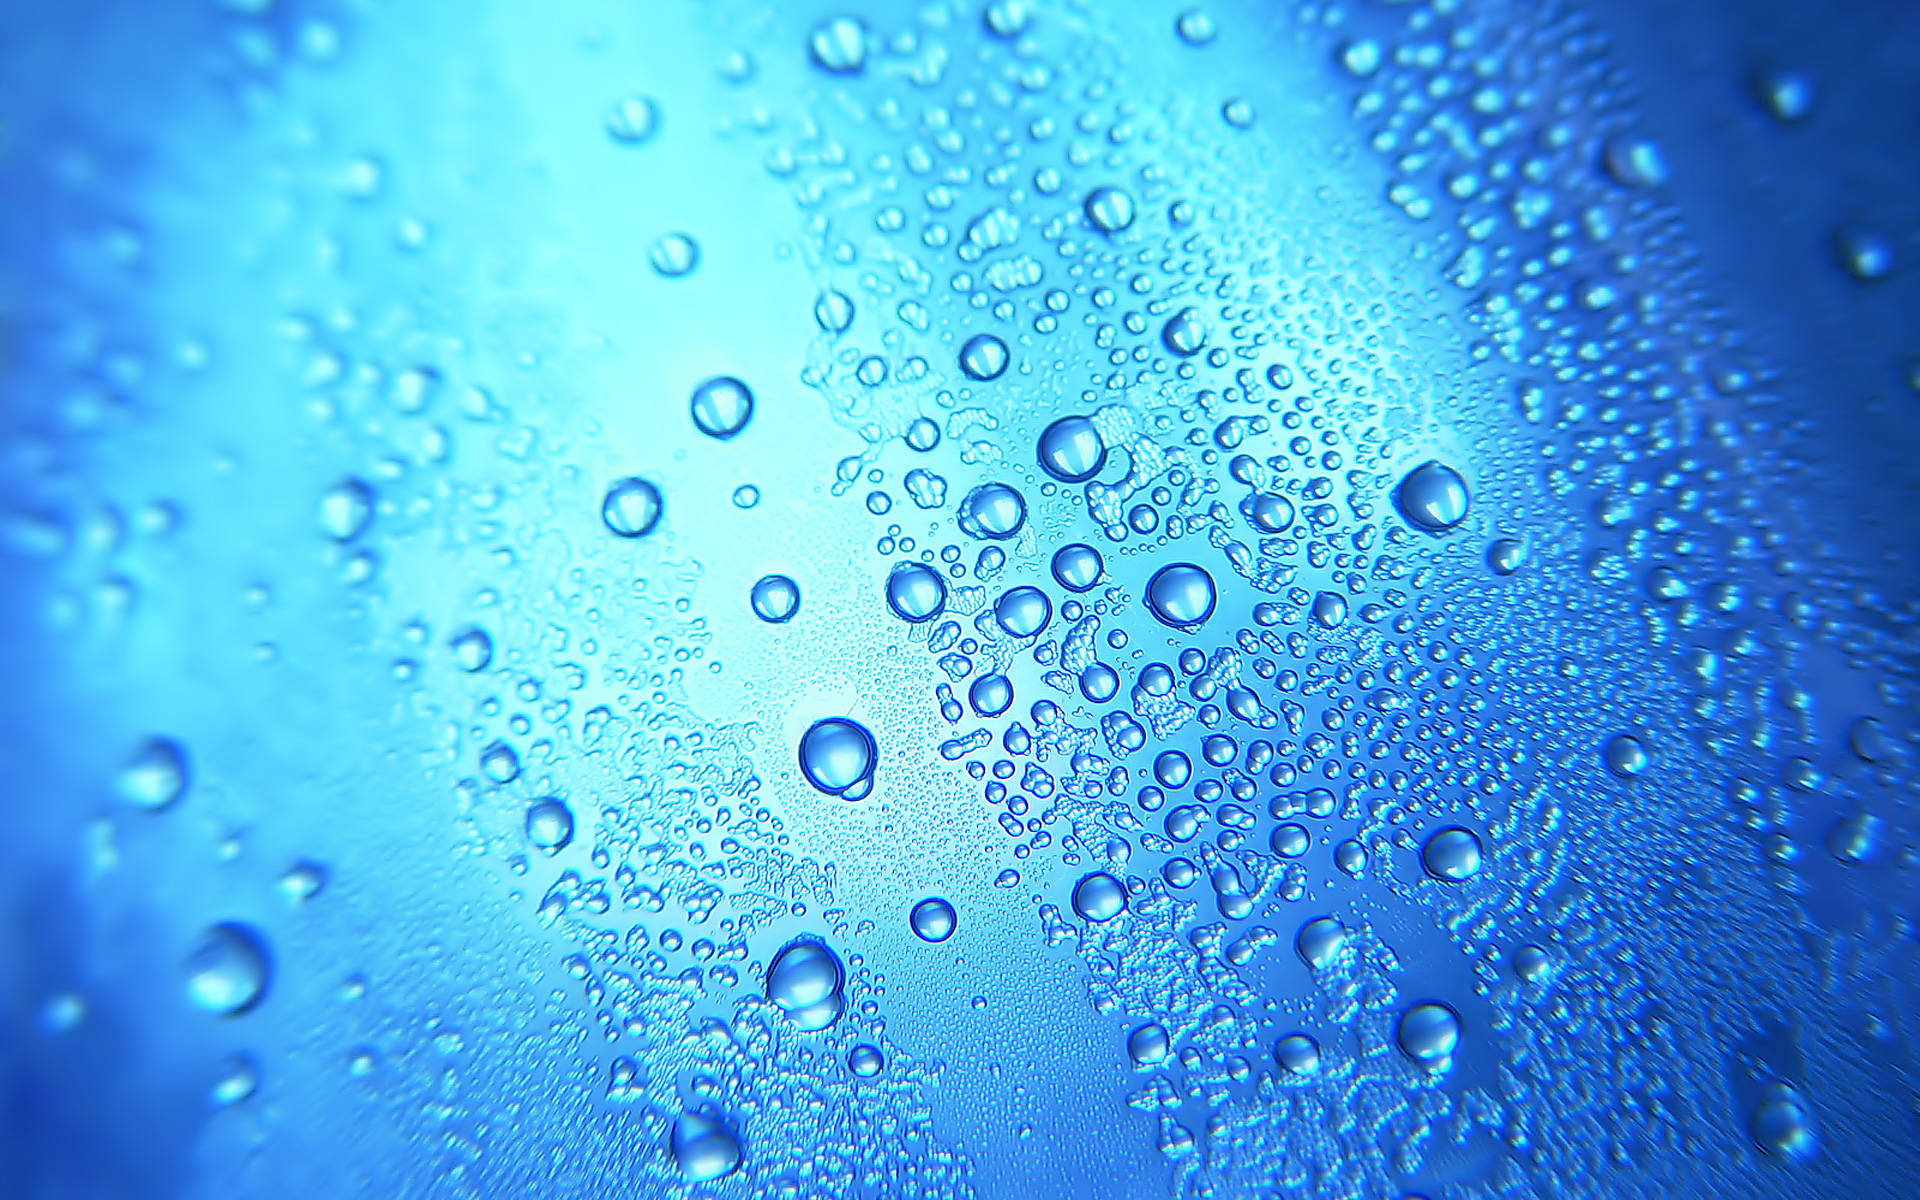 More raindrop shots 7  Blue wallpapers Blue inspiration Shades of blue